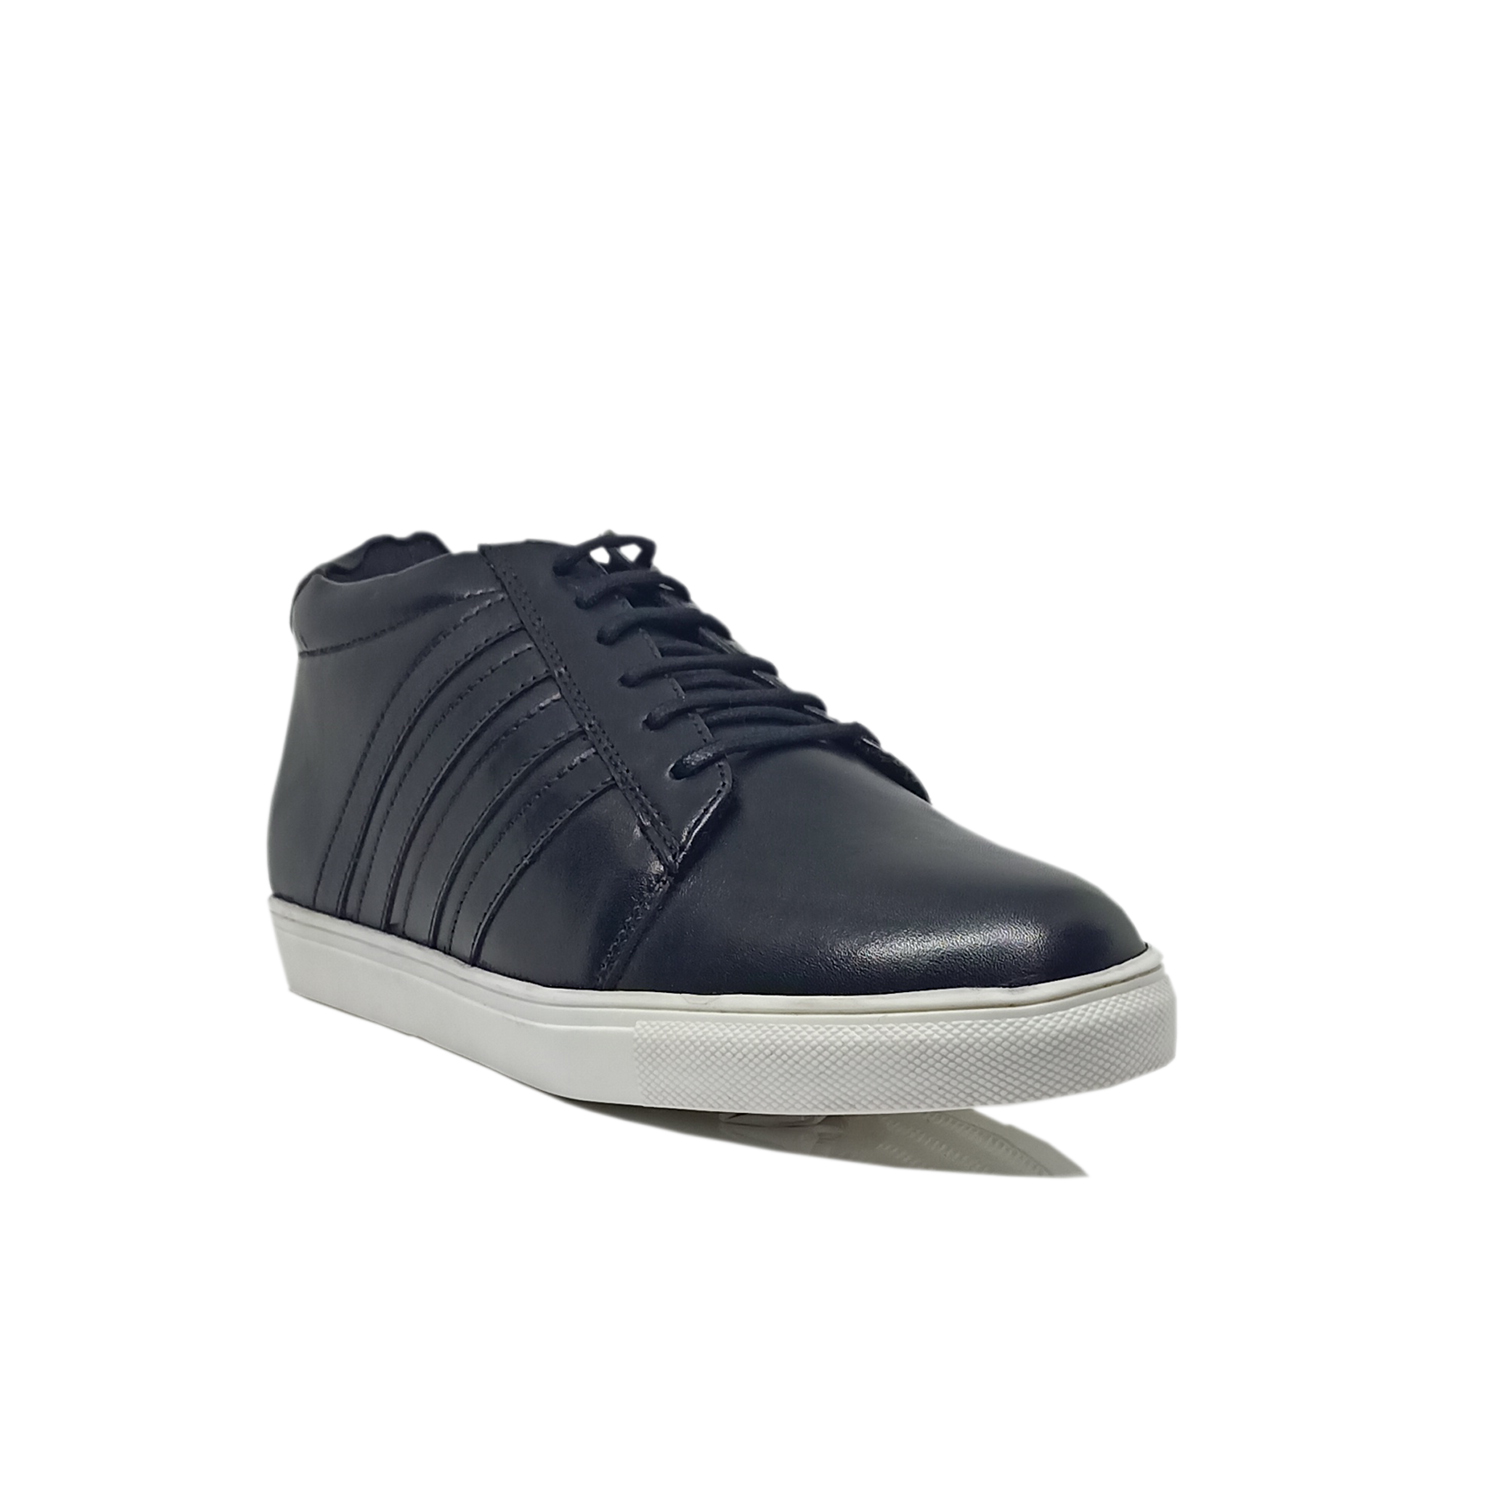 Elevato Height Increasing Black Leather Sneakers – 3 Inches